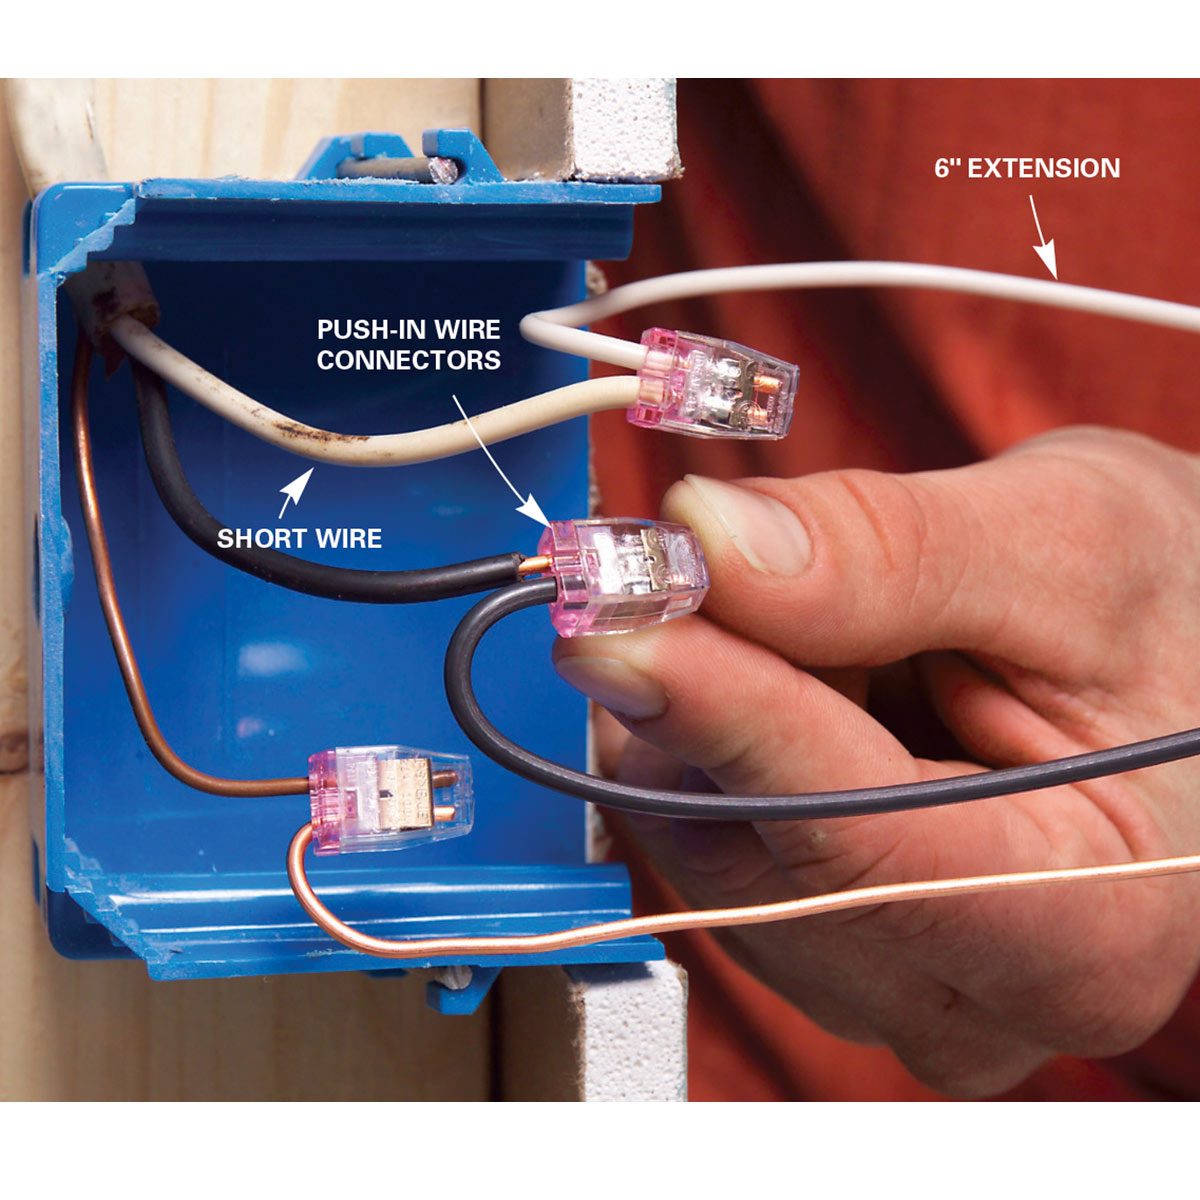 Wiring A Switch And Outlet The Safe And Easy Way Family Handyman,Kabocha Squash Size